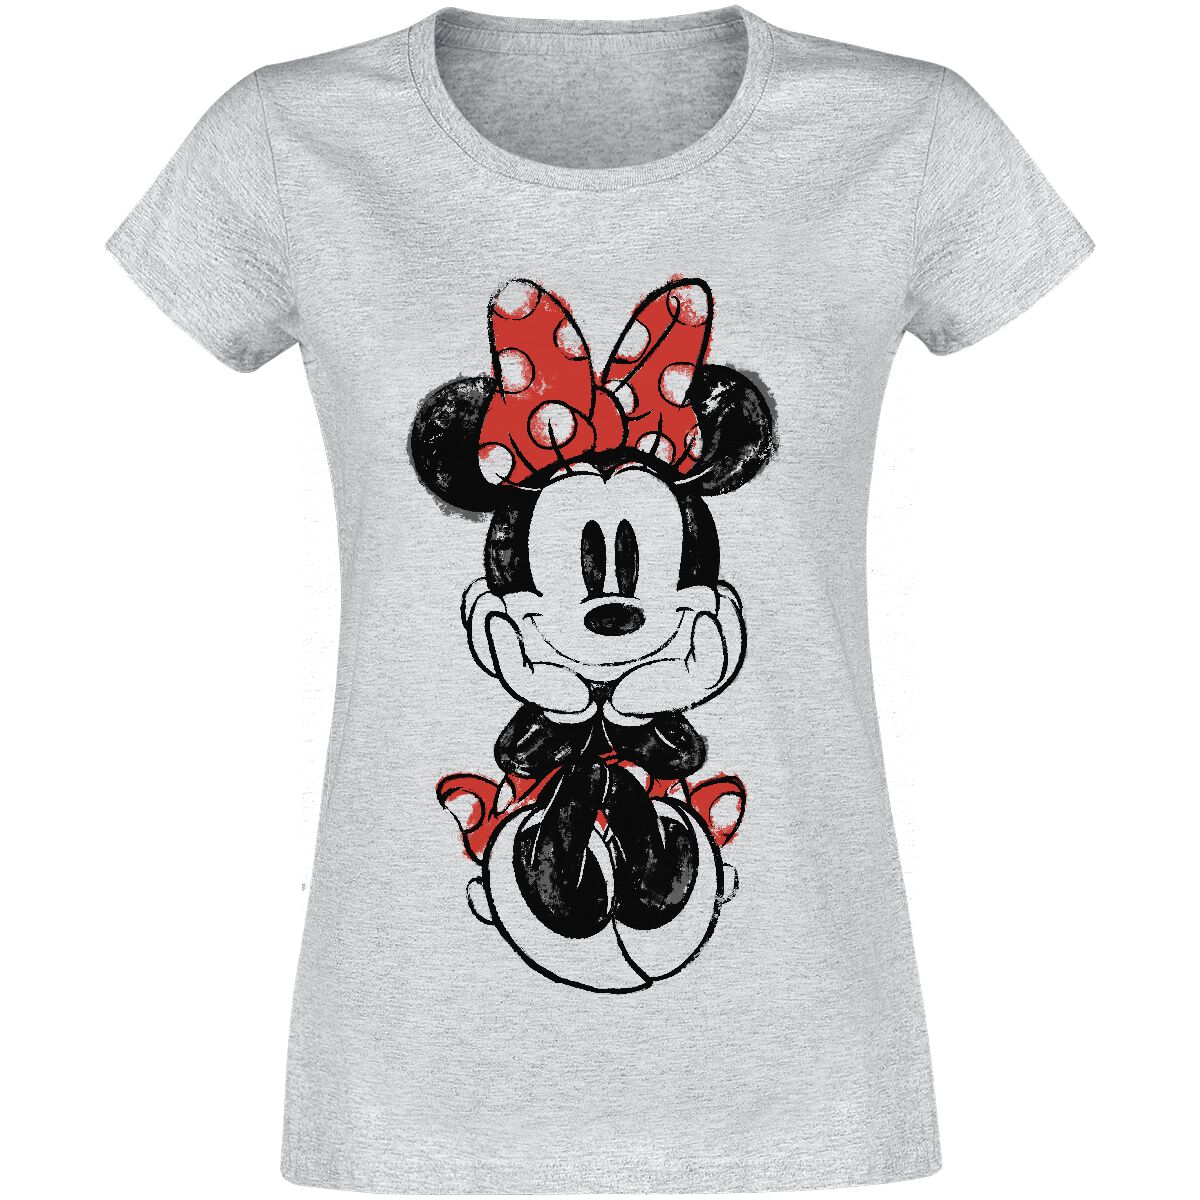 Mickey Mouse Minnie Maus T-Shirt grau in L von Mickey Mouse